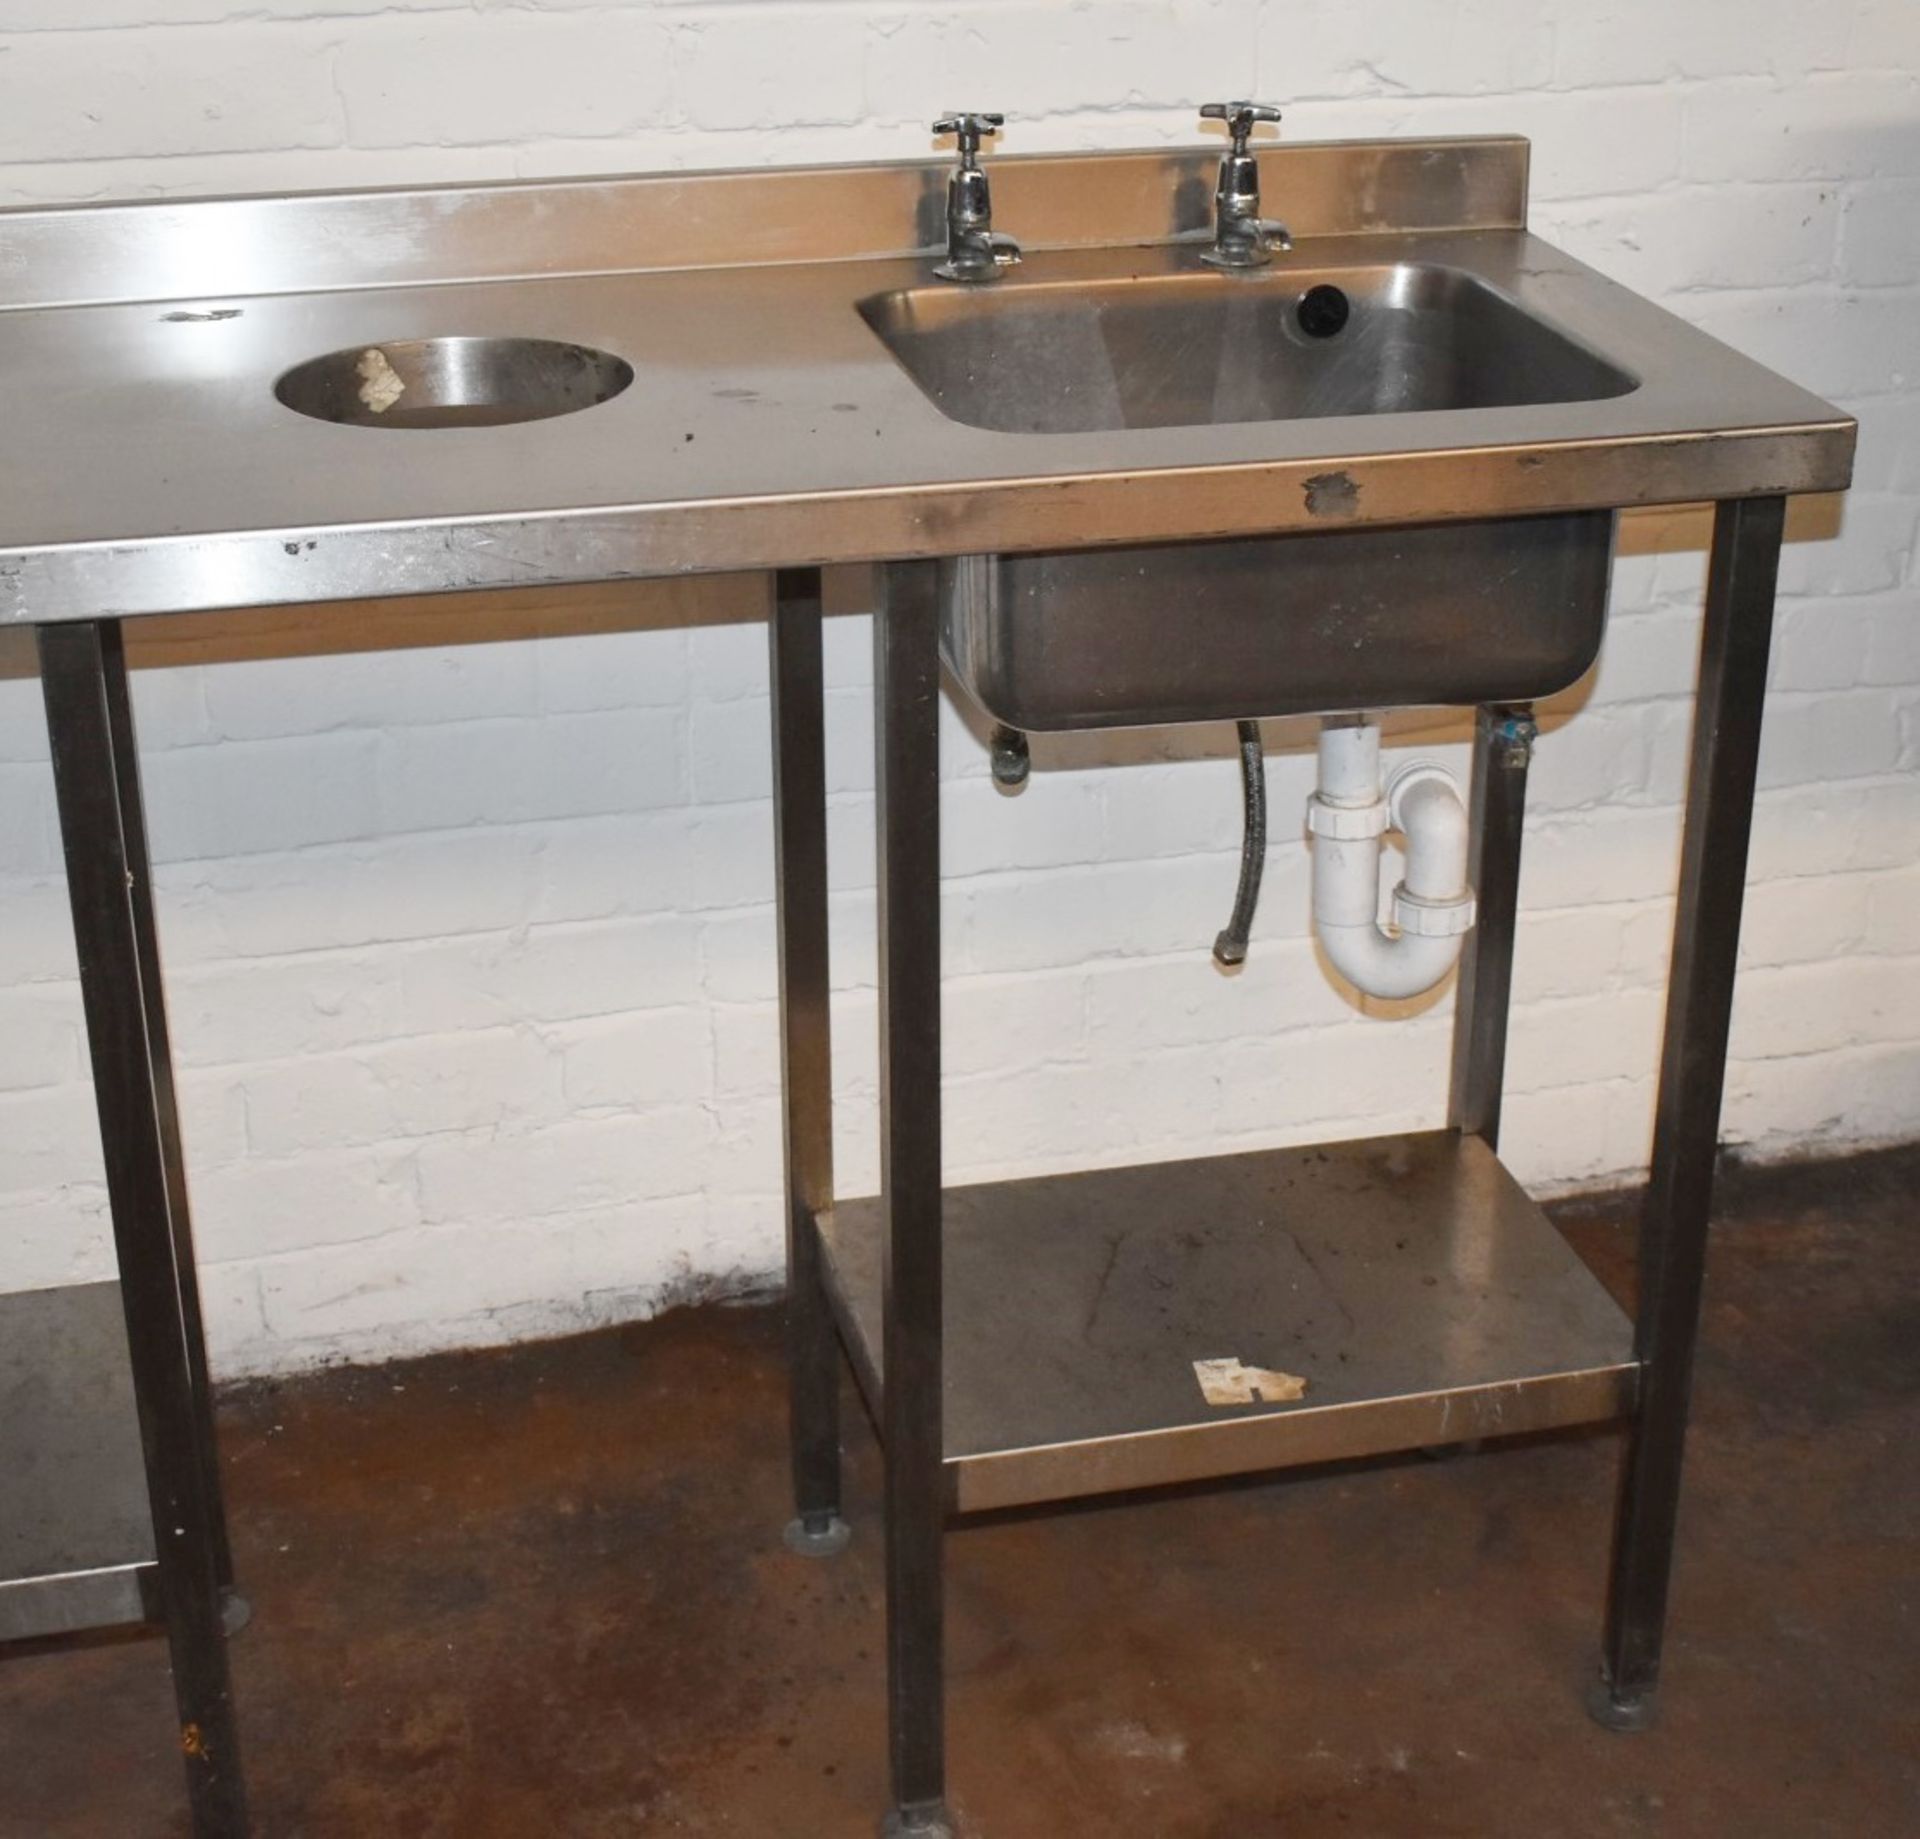 1 x Stainless Steel Sink Unt Featuring Single Wash Bowl, Taps, Prep Area and Central Waste Bin Chute - Image 3 of 8